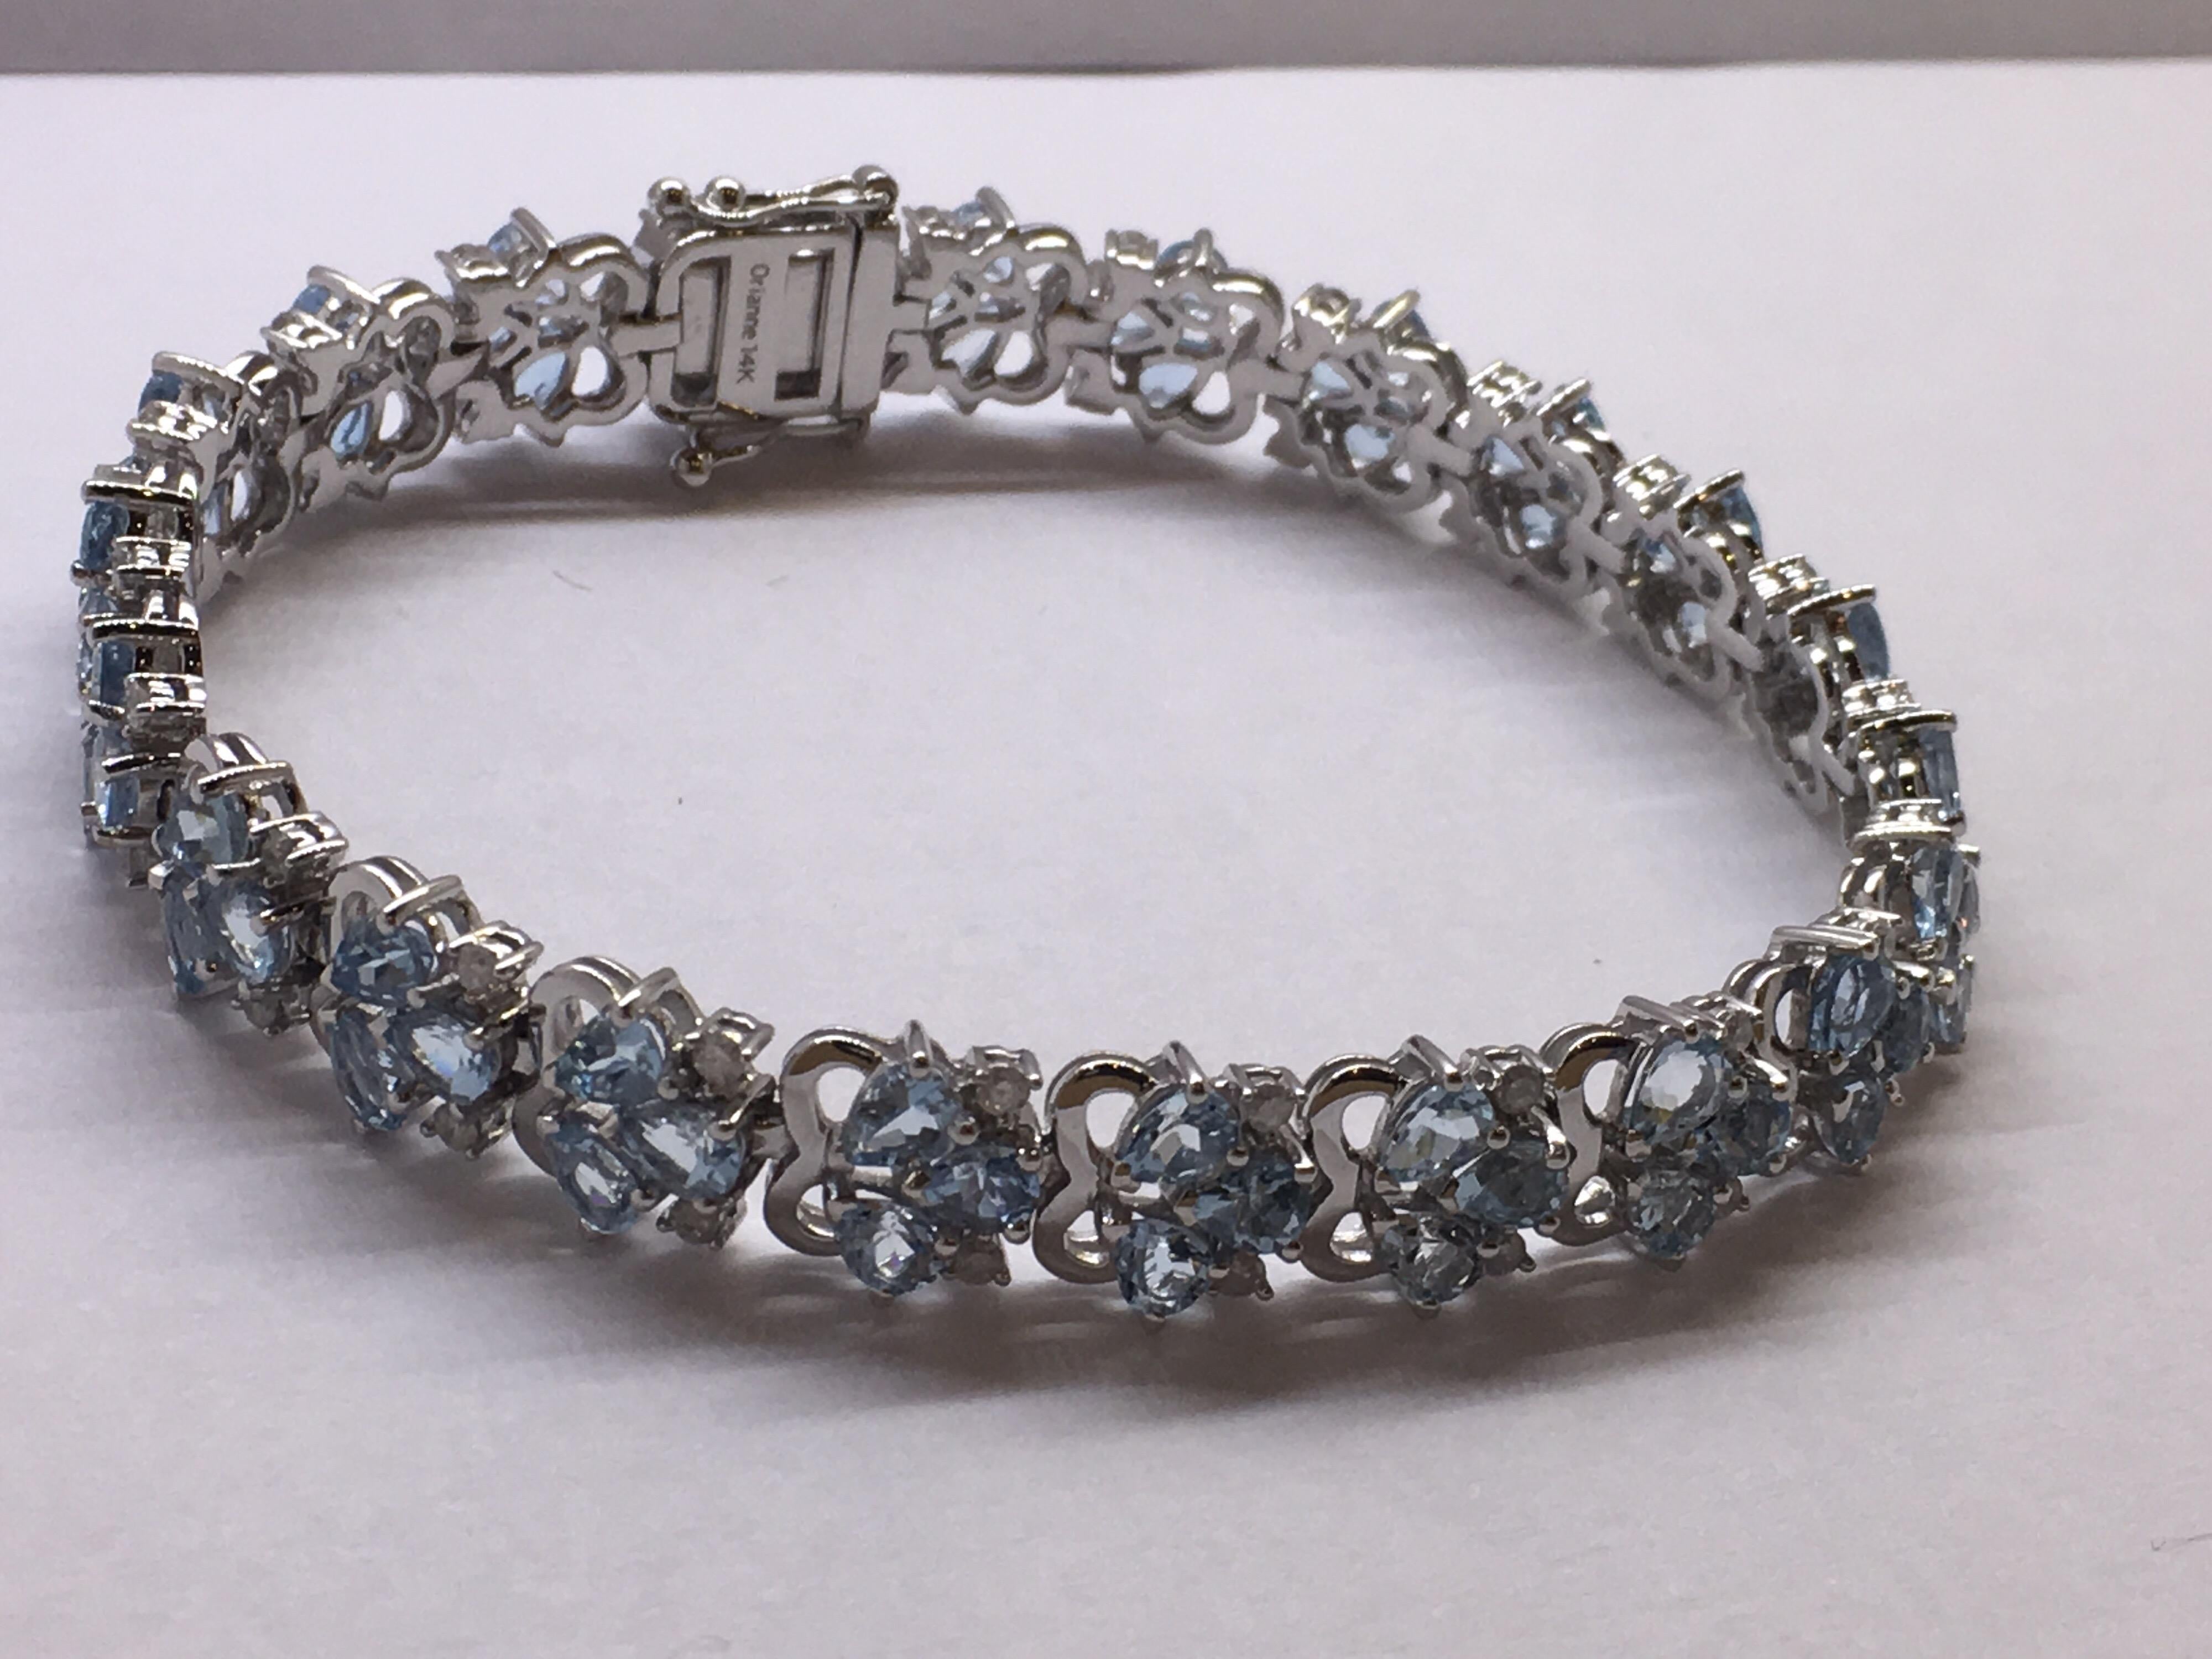 Pear shape Aquamarine and Round Diamonds set in 14 Karat White gold is a one of a kind Handcrafted Bracelet. Total Weight of Aquamarine is 9.43 Carat and Total weight of White Diamonds ( Color H-J ) is 0.84 Carat.Total weight of Bracelet including